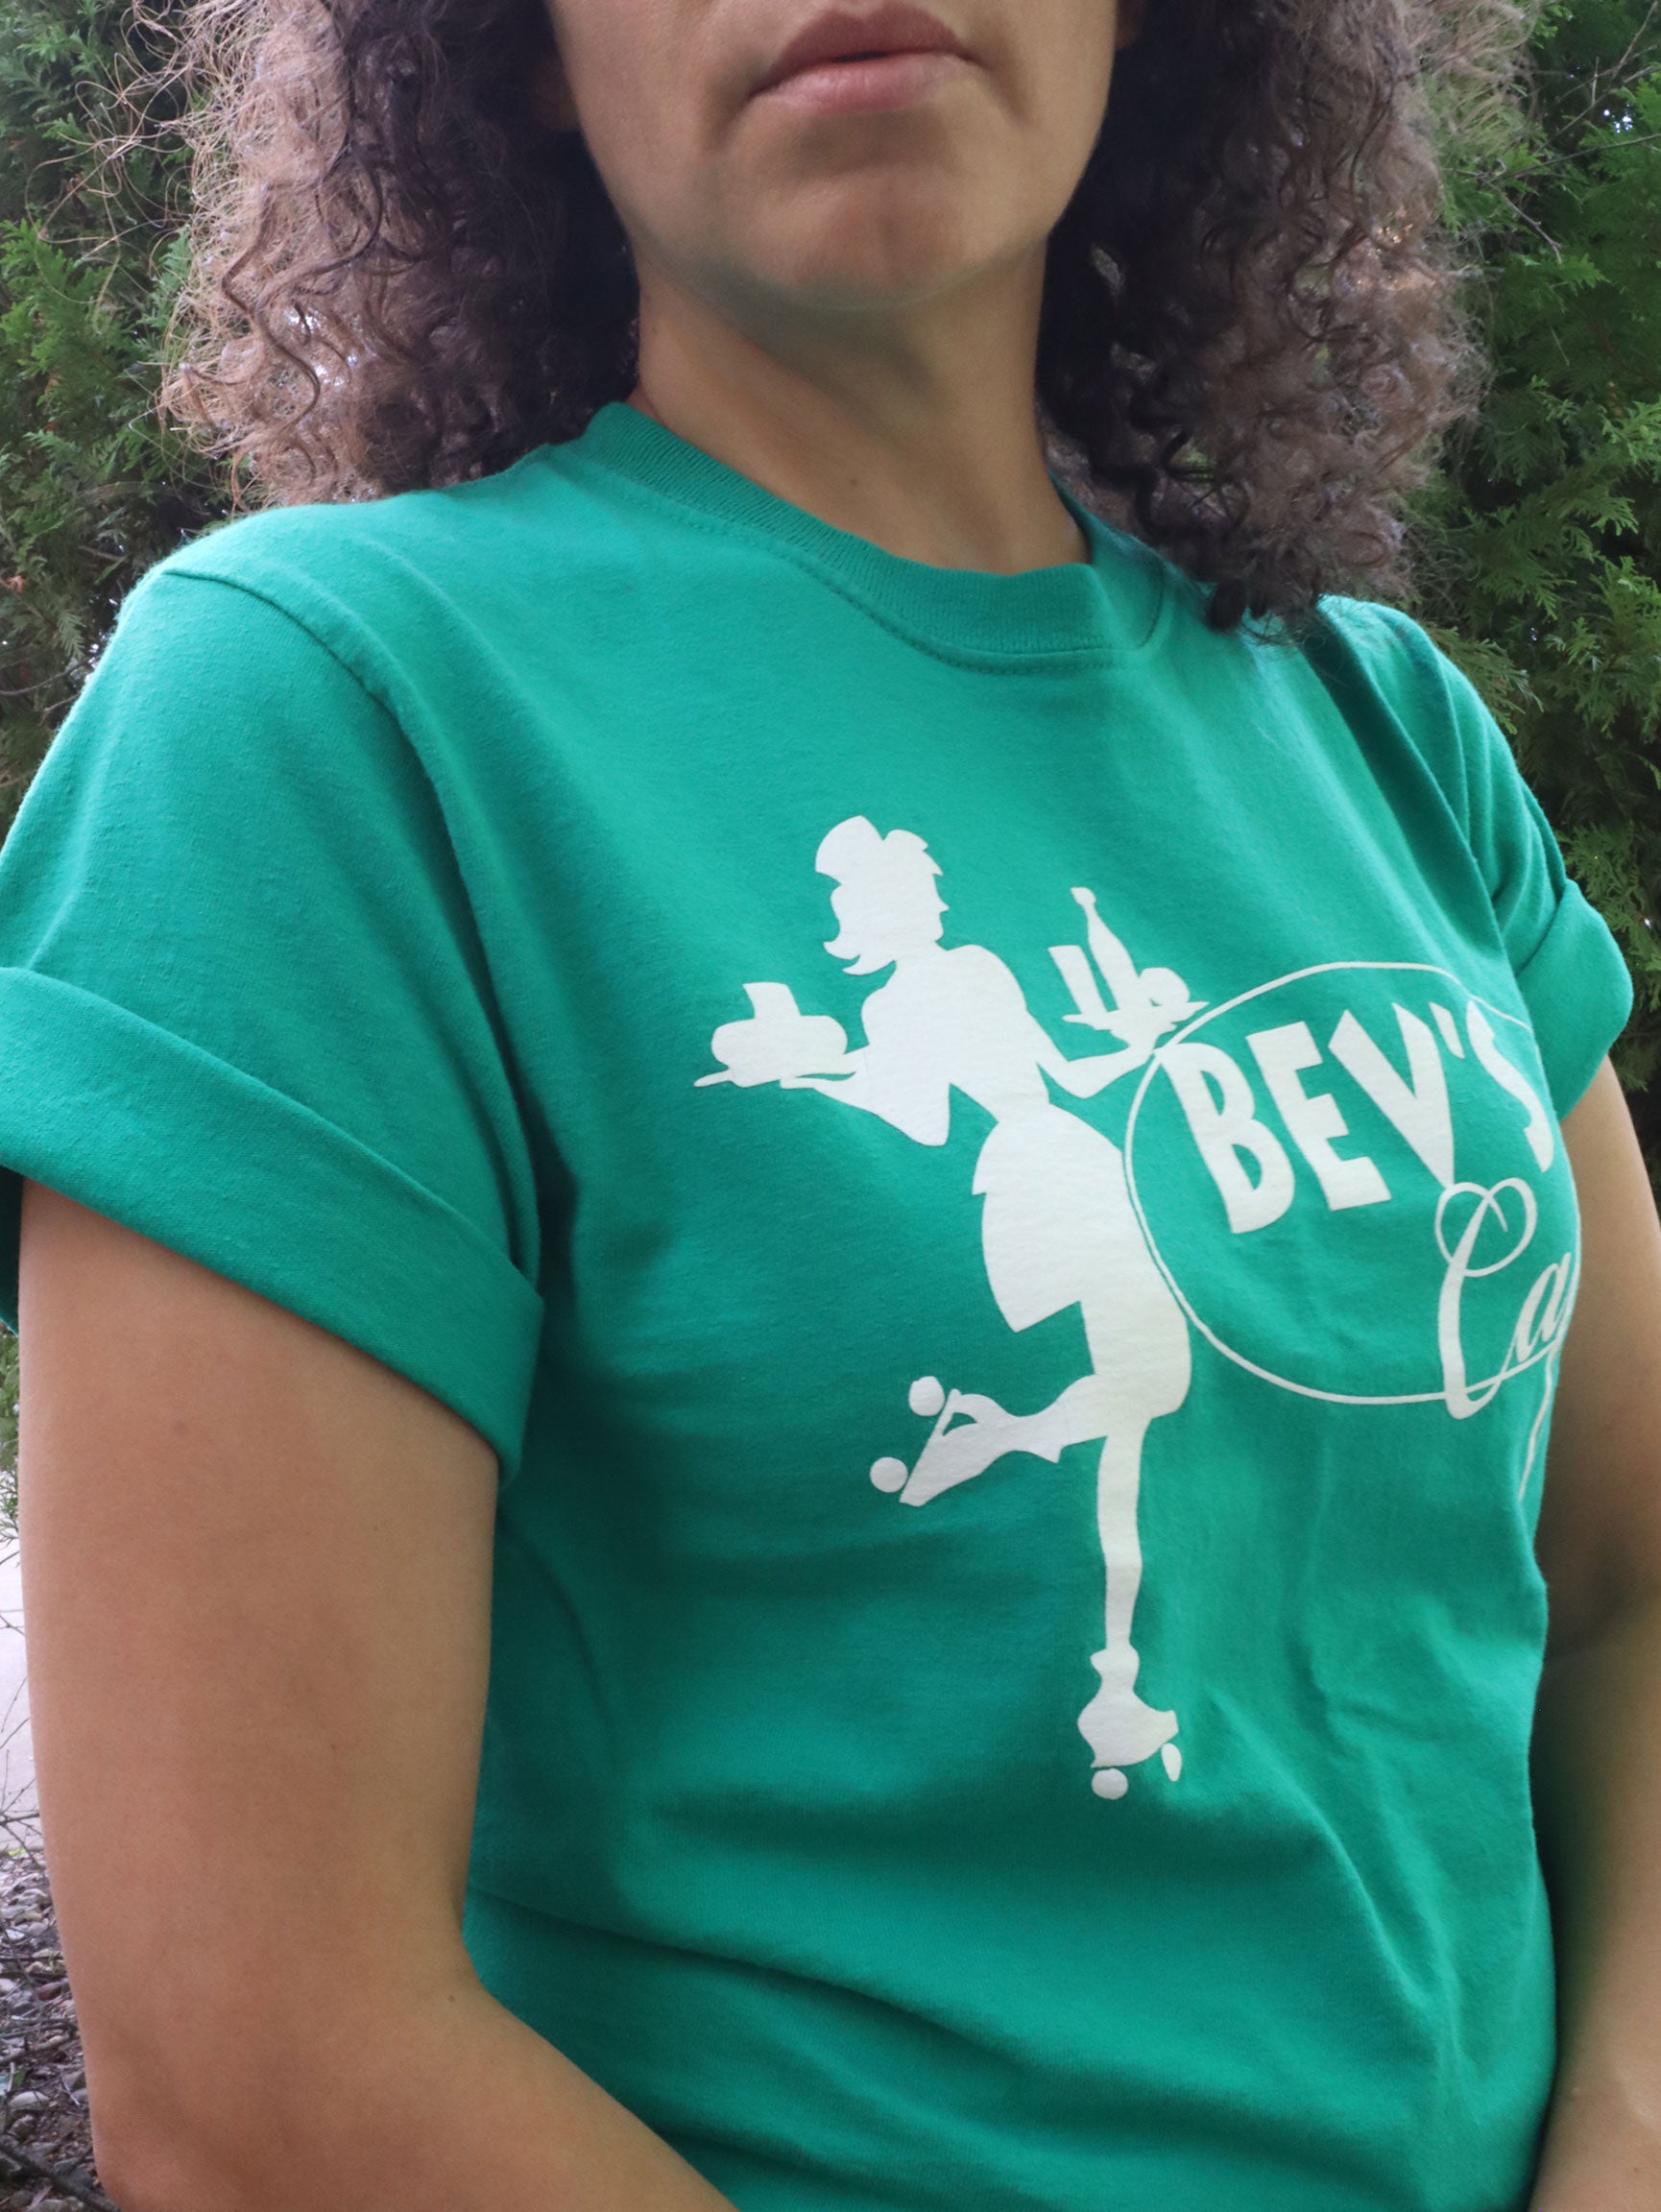 Bev's Cafe Graphic Tee